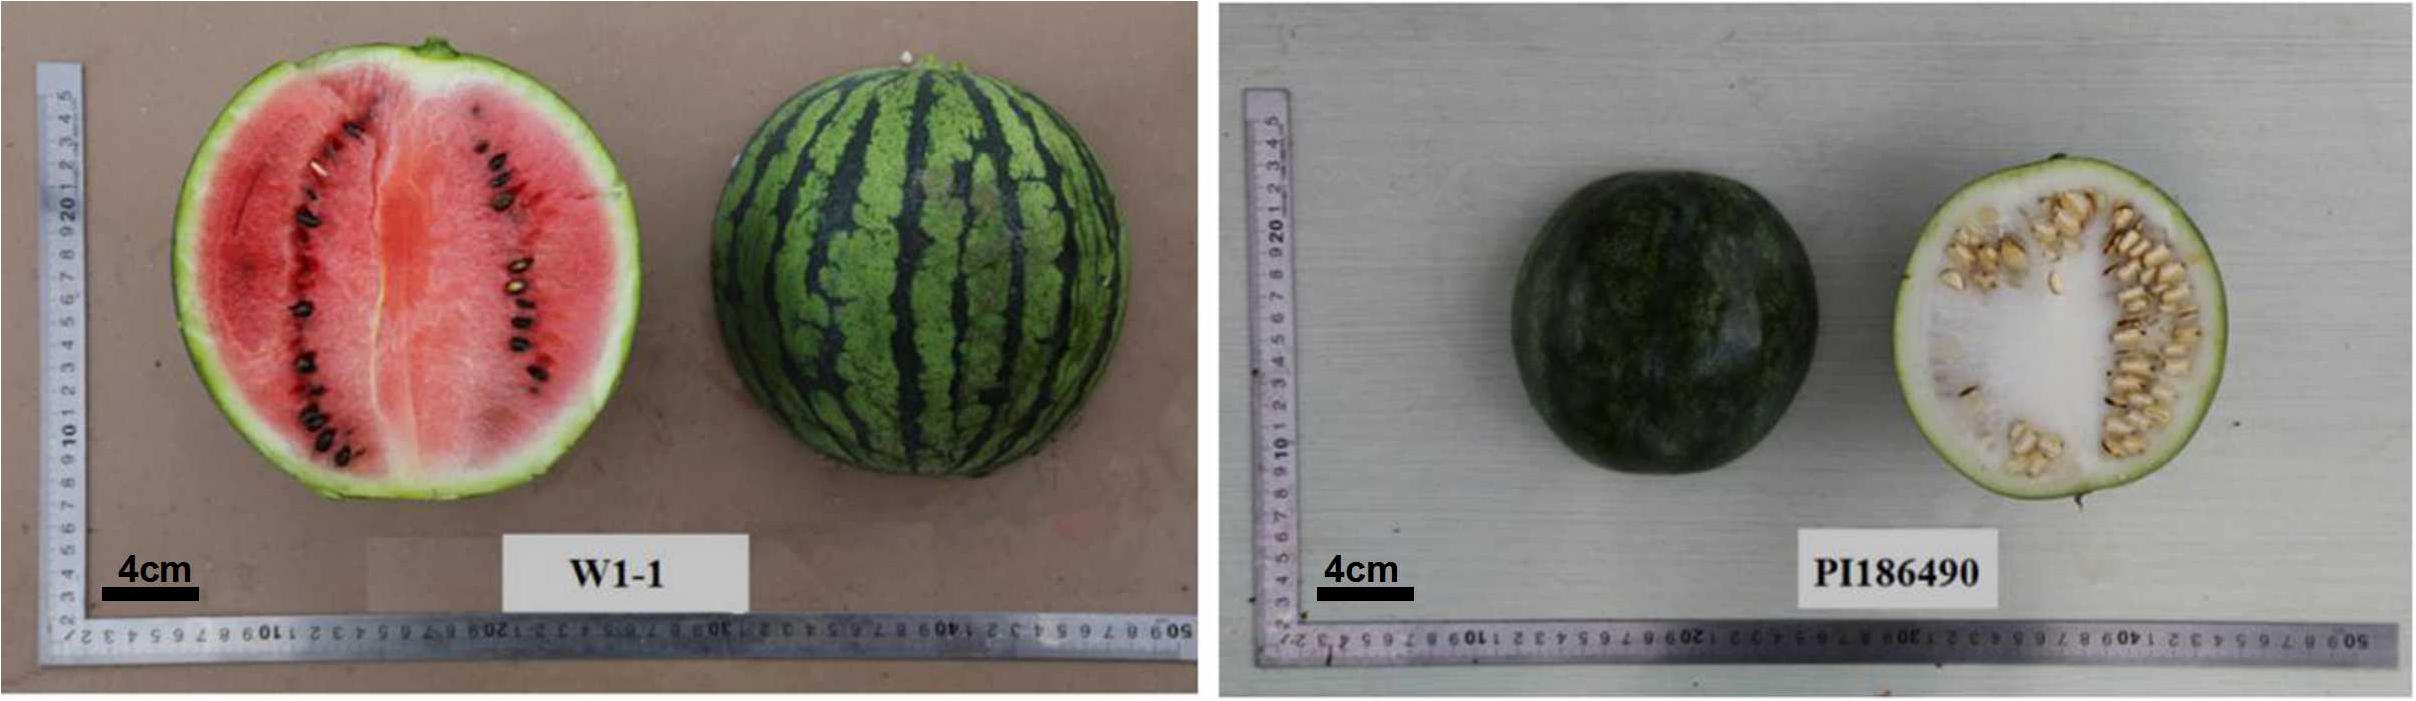 Frontiers | Linkage Mapping and Comparative Transcriptome Analysis of  Firmness in Watermelon (Citrullus lanatus)